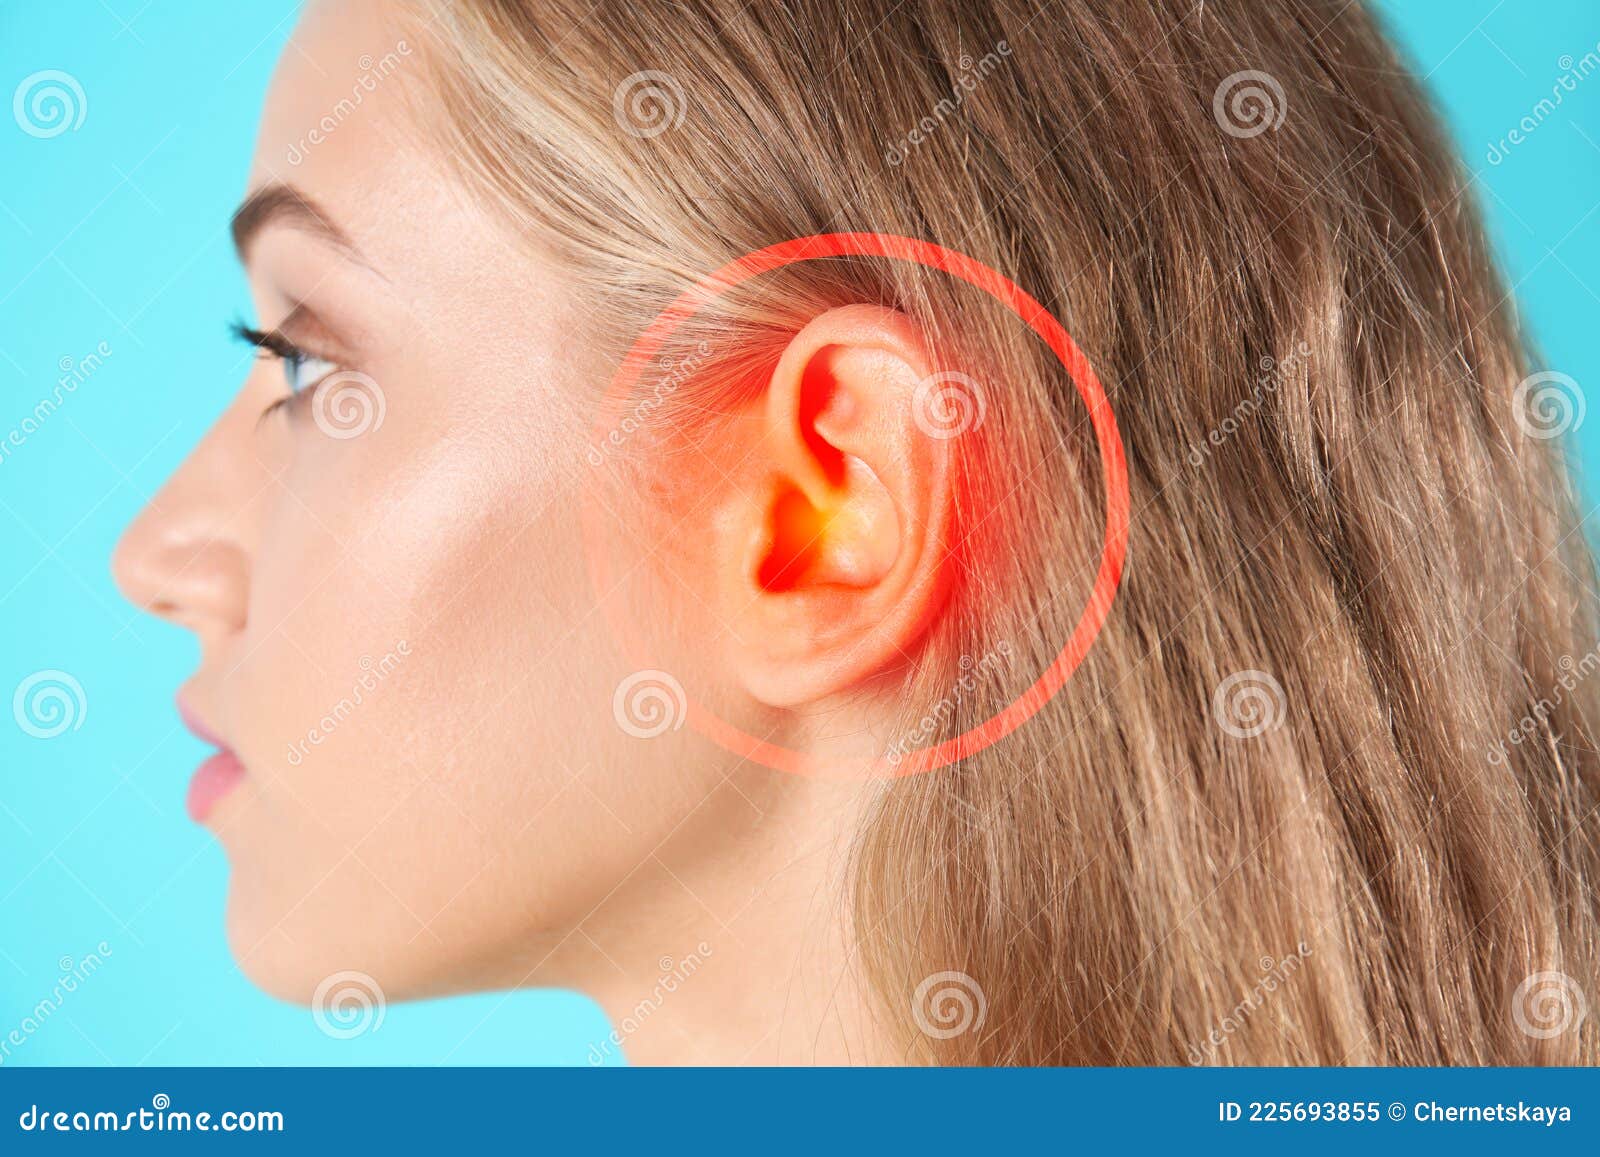 young woman with hearing problem on turquoise background, closeup